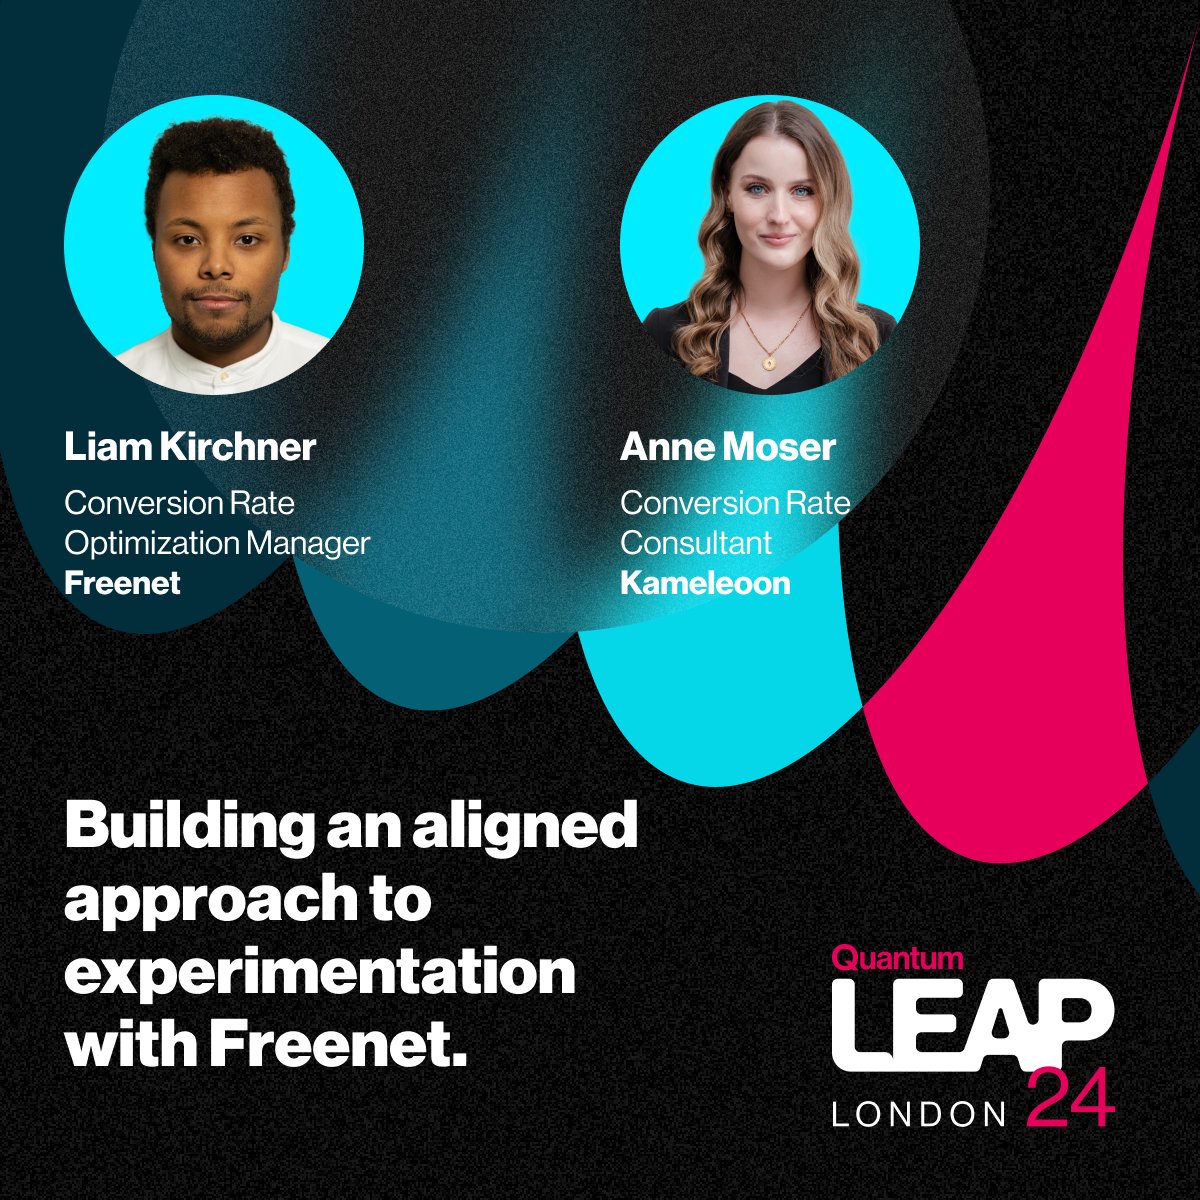 📣 LEAP into London 2024 Sessions Speaker 📣 Hear from Freenet's Liam Kirchner and Kameleoon's Anne Moser, to discover how combining session replays with A/B testing can elevate your digital tactics to new heights. Register now: hubs.ly/Q02tLD1S0 #LEAPintoLDN